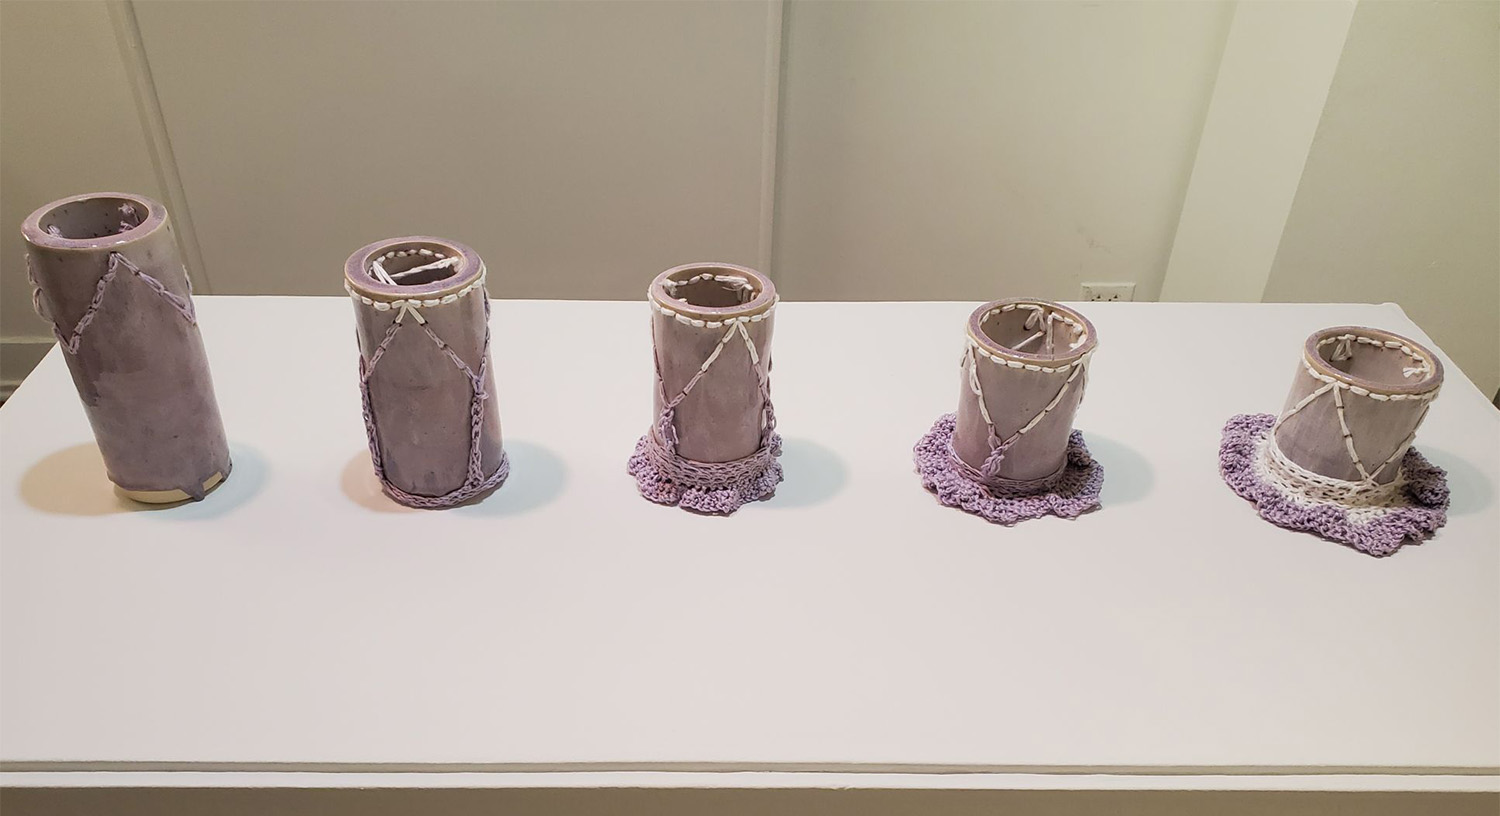 A set of purple cylinders with crochet pooling around them.